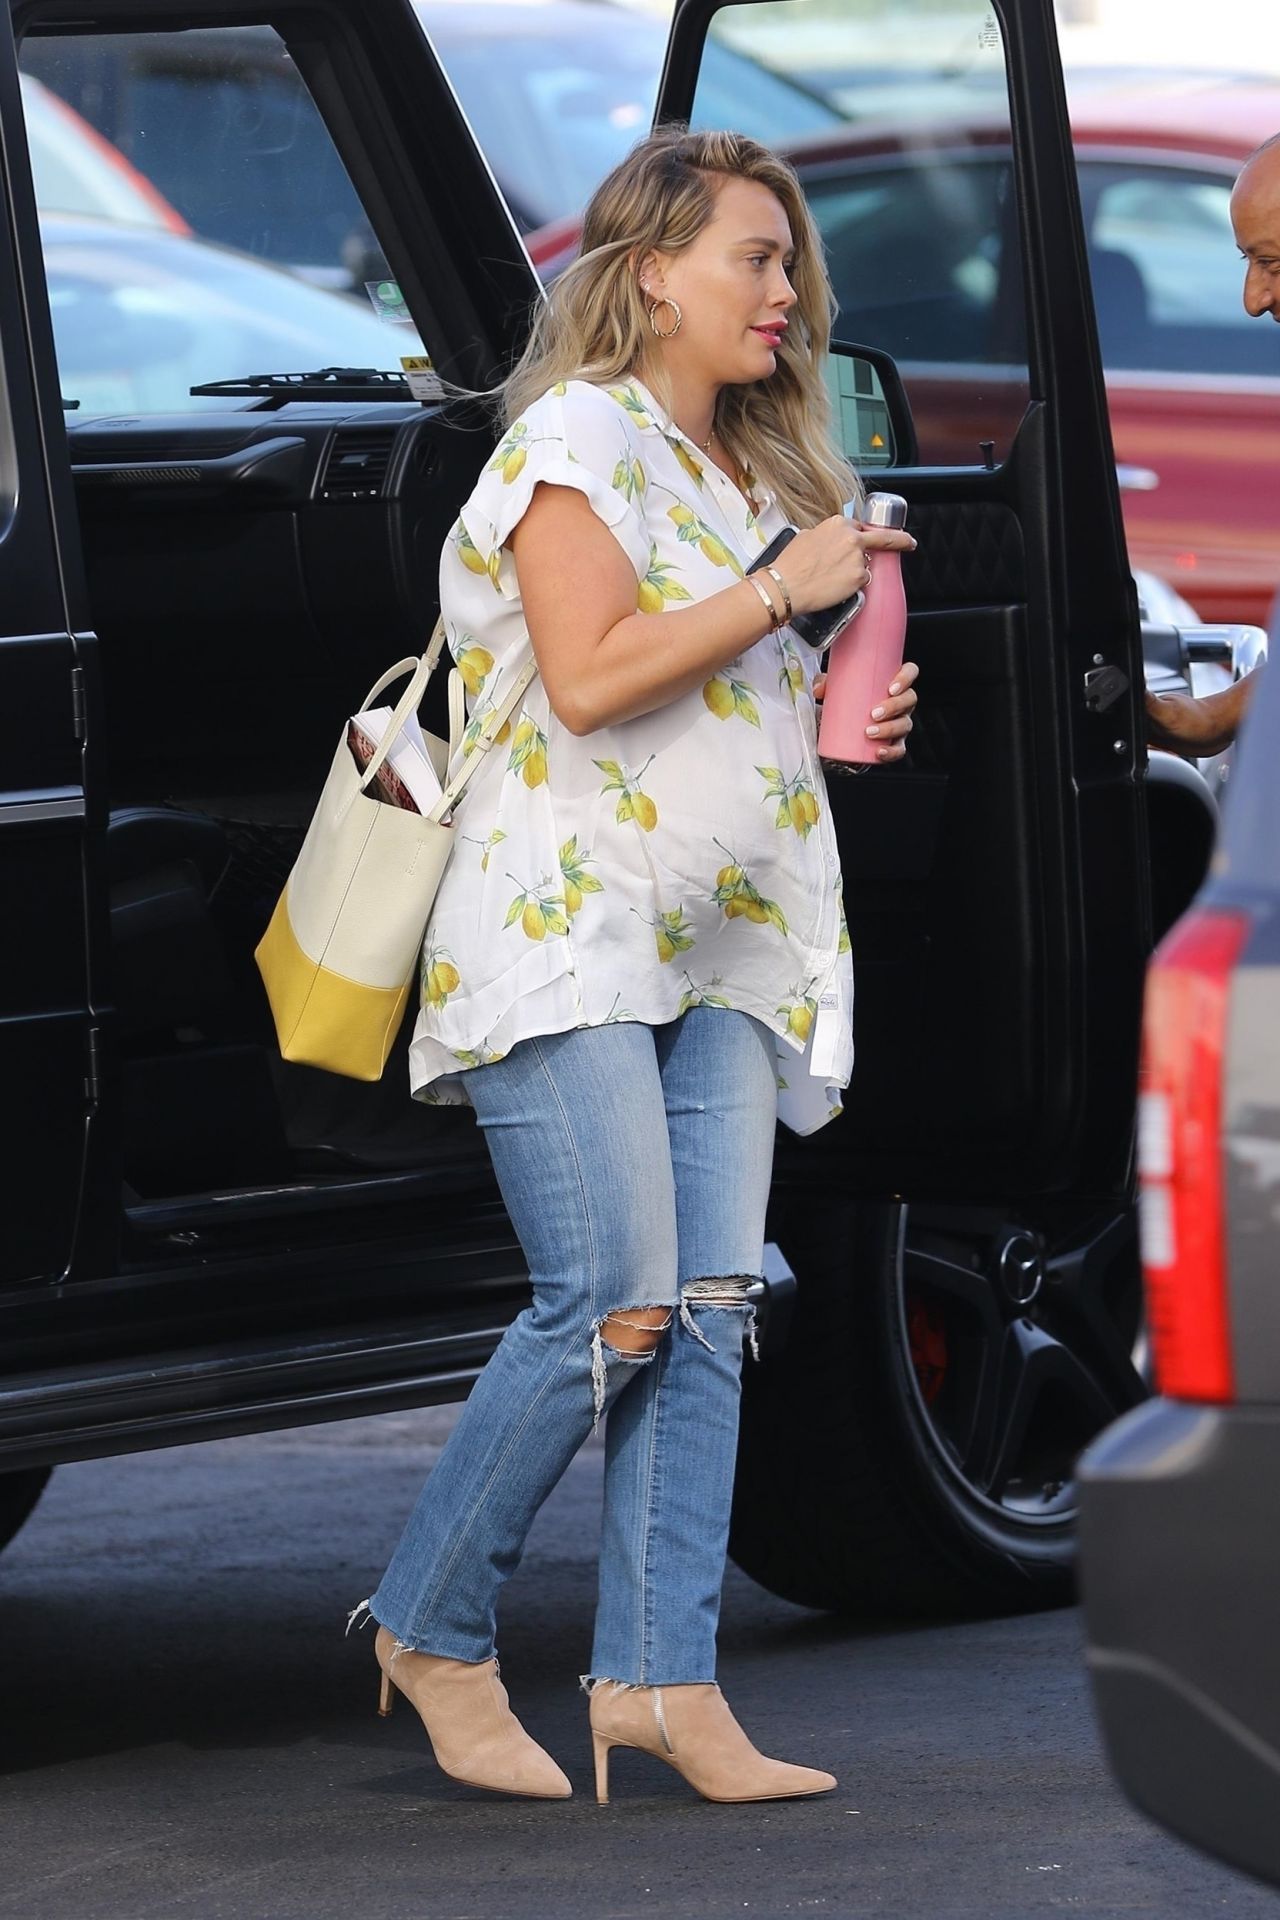 hilary-duff-arriving-for-an-appointment-in-la-10-08-2018-5.jpg